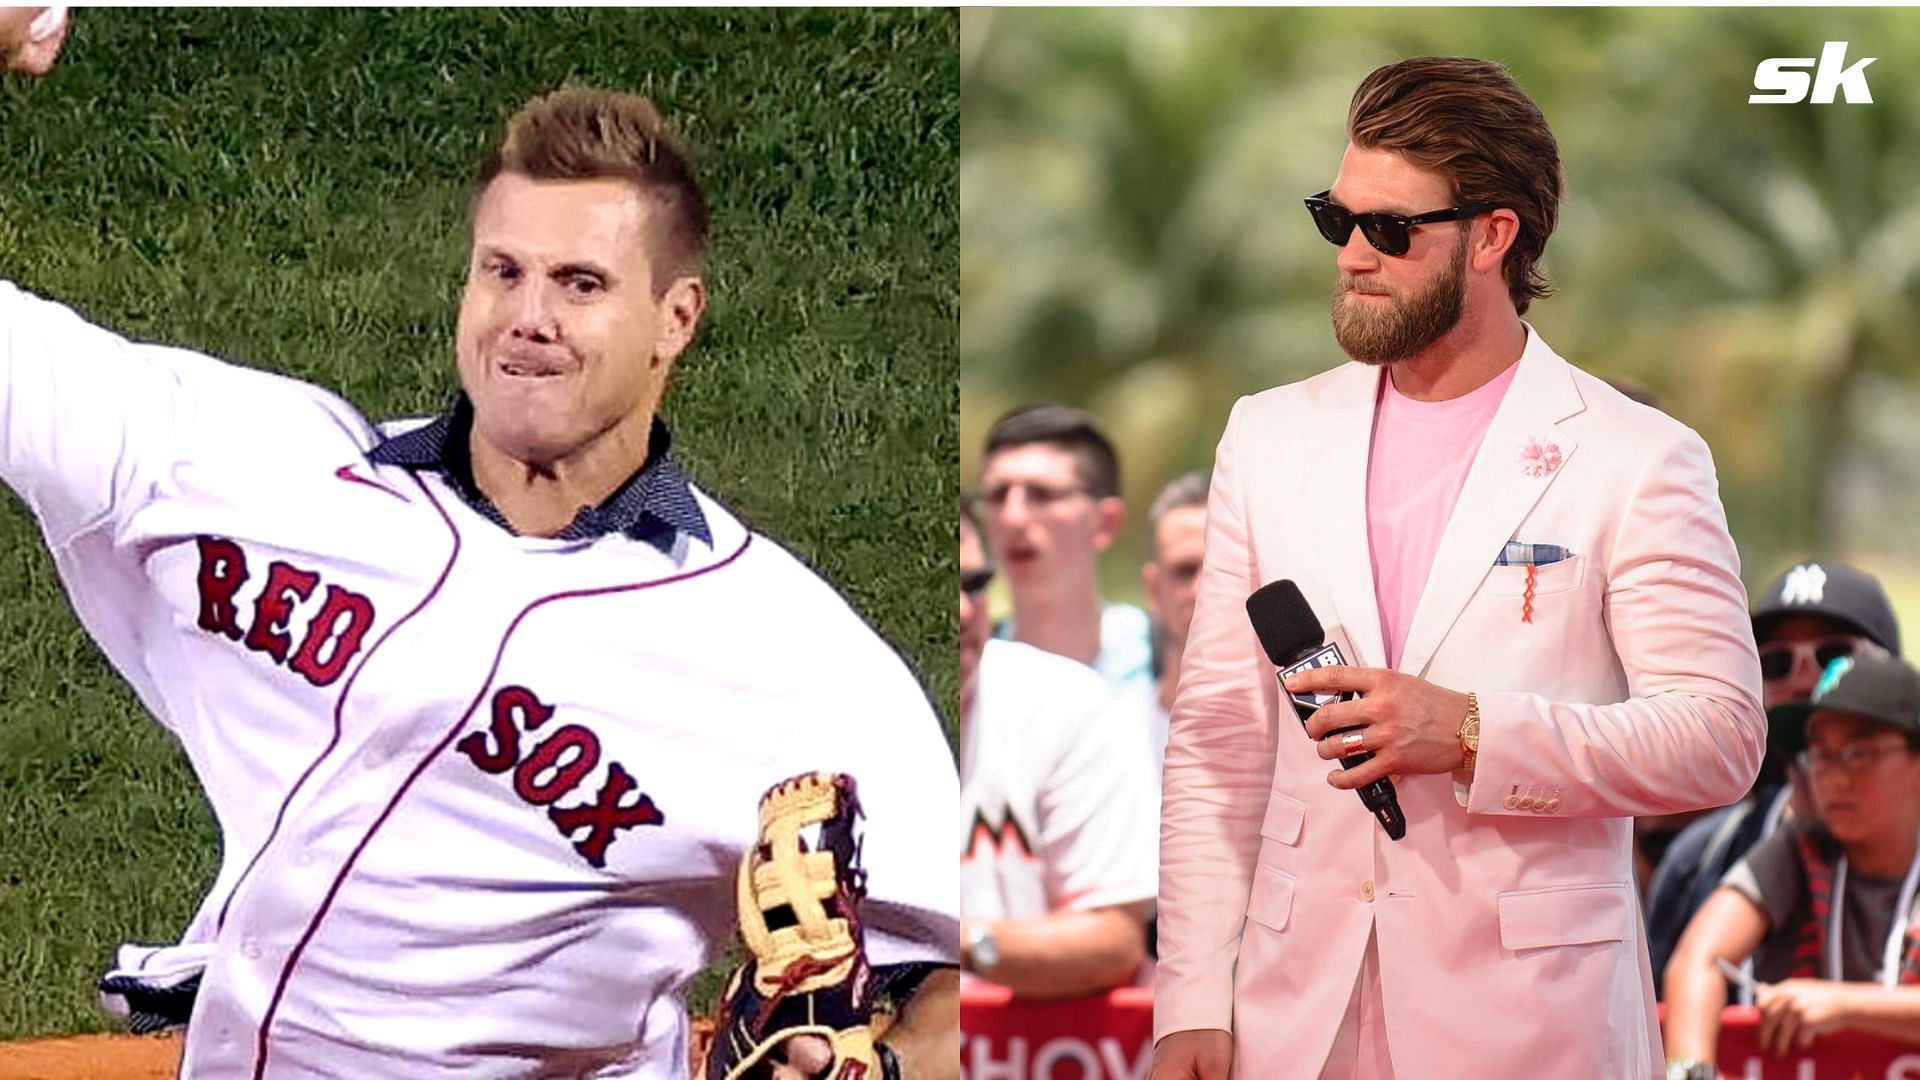 Bryce Harper: Auctioned Jonathan Papelbon fight jersey not as advertised